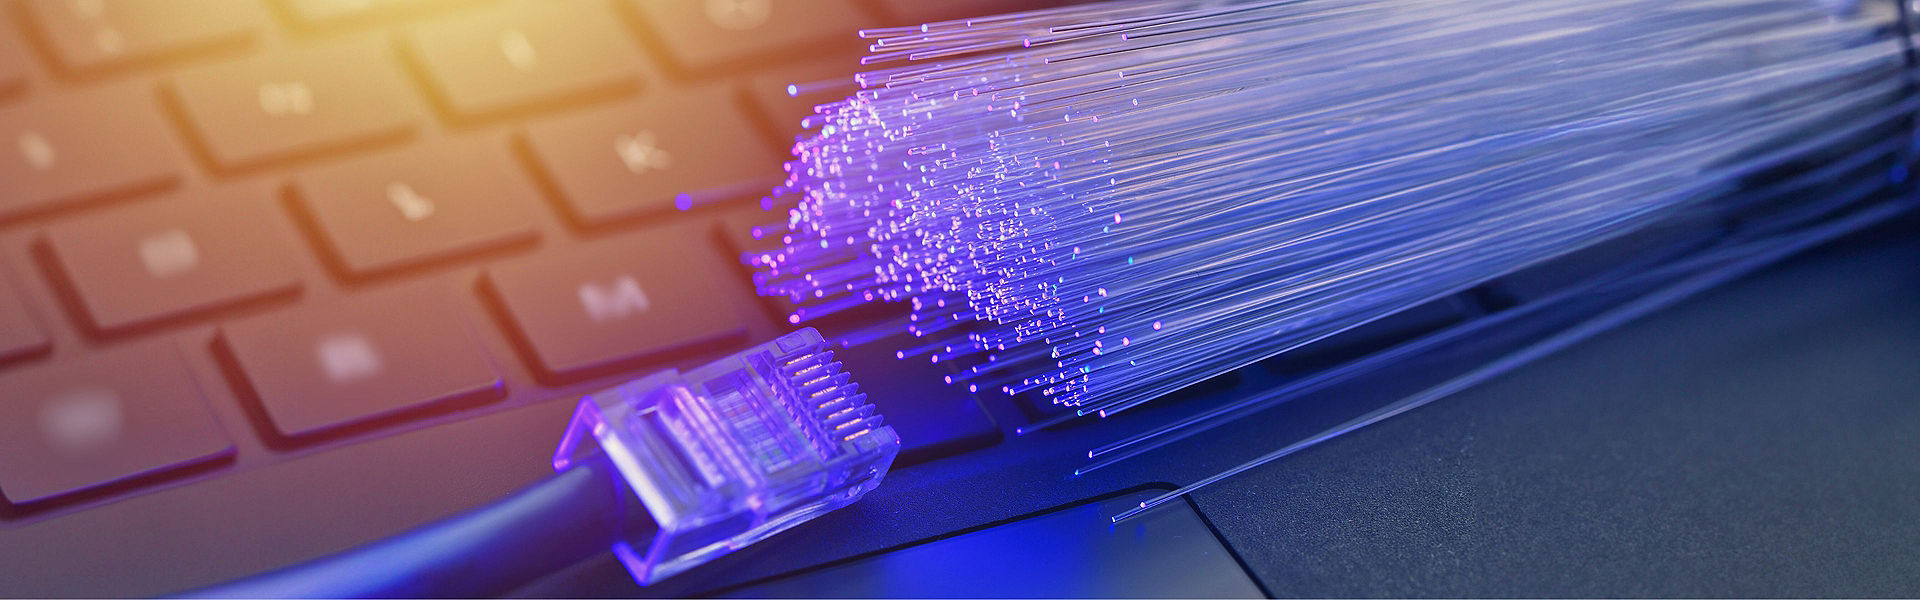 Broadband fibres and cable laying on a keyboard with blue and golden light